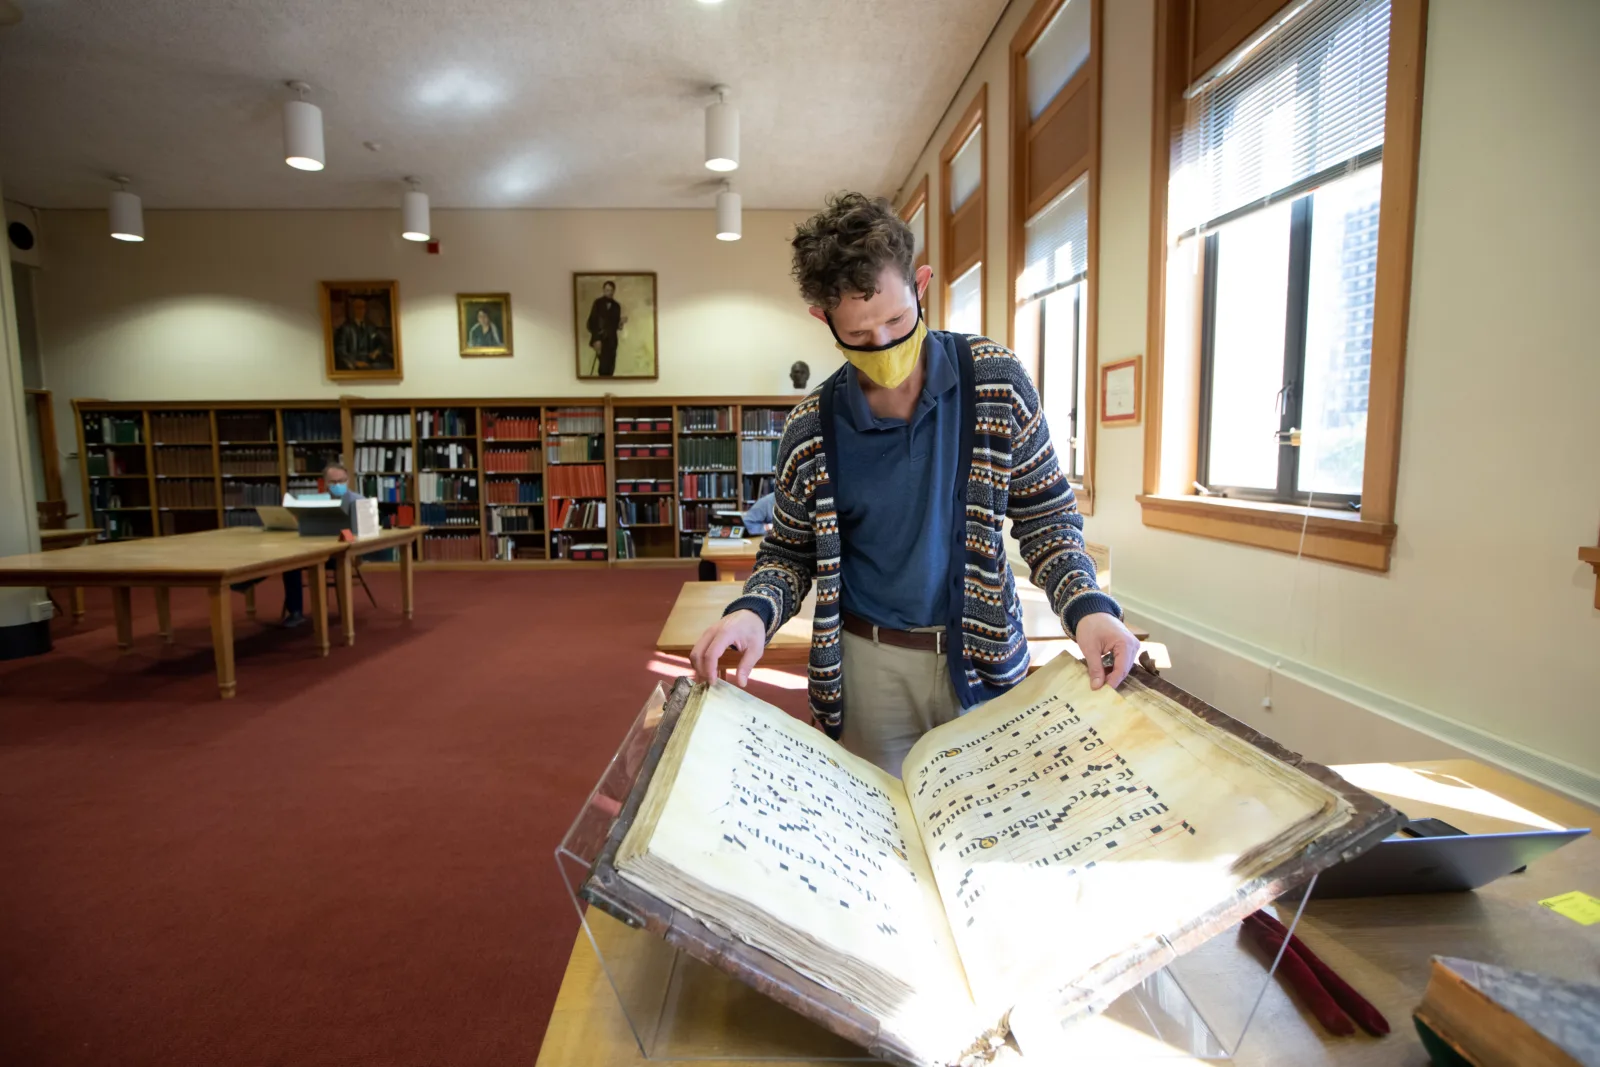 2021-22 Long-Term Fellow Aaron Hyman studies an 18th-century choirbook from the Newberry collection.